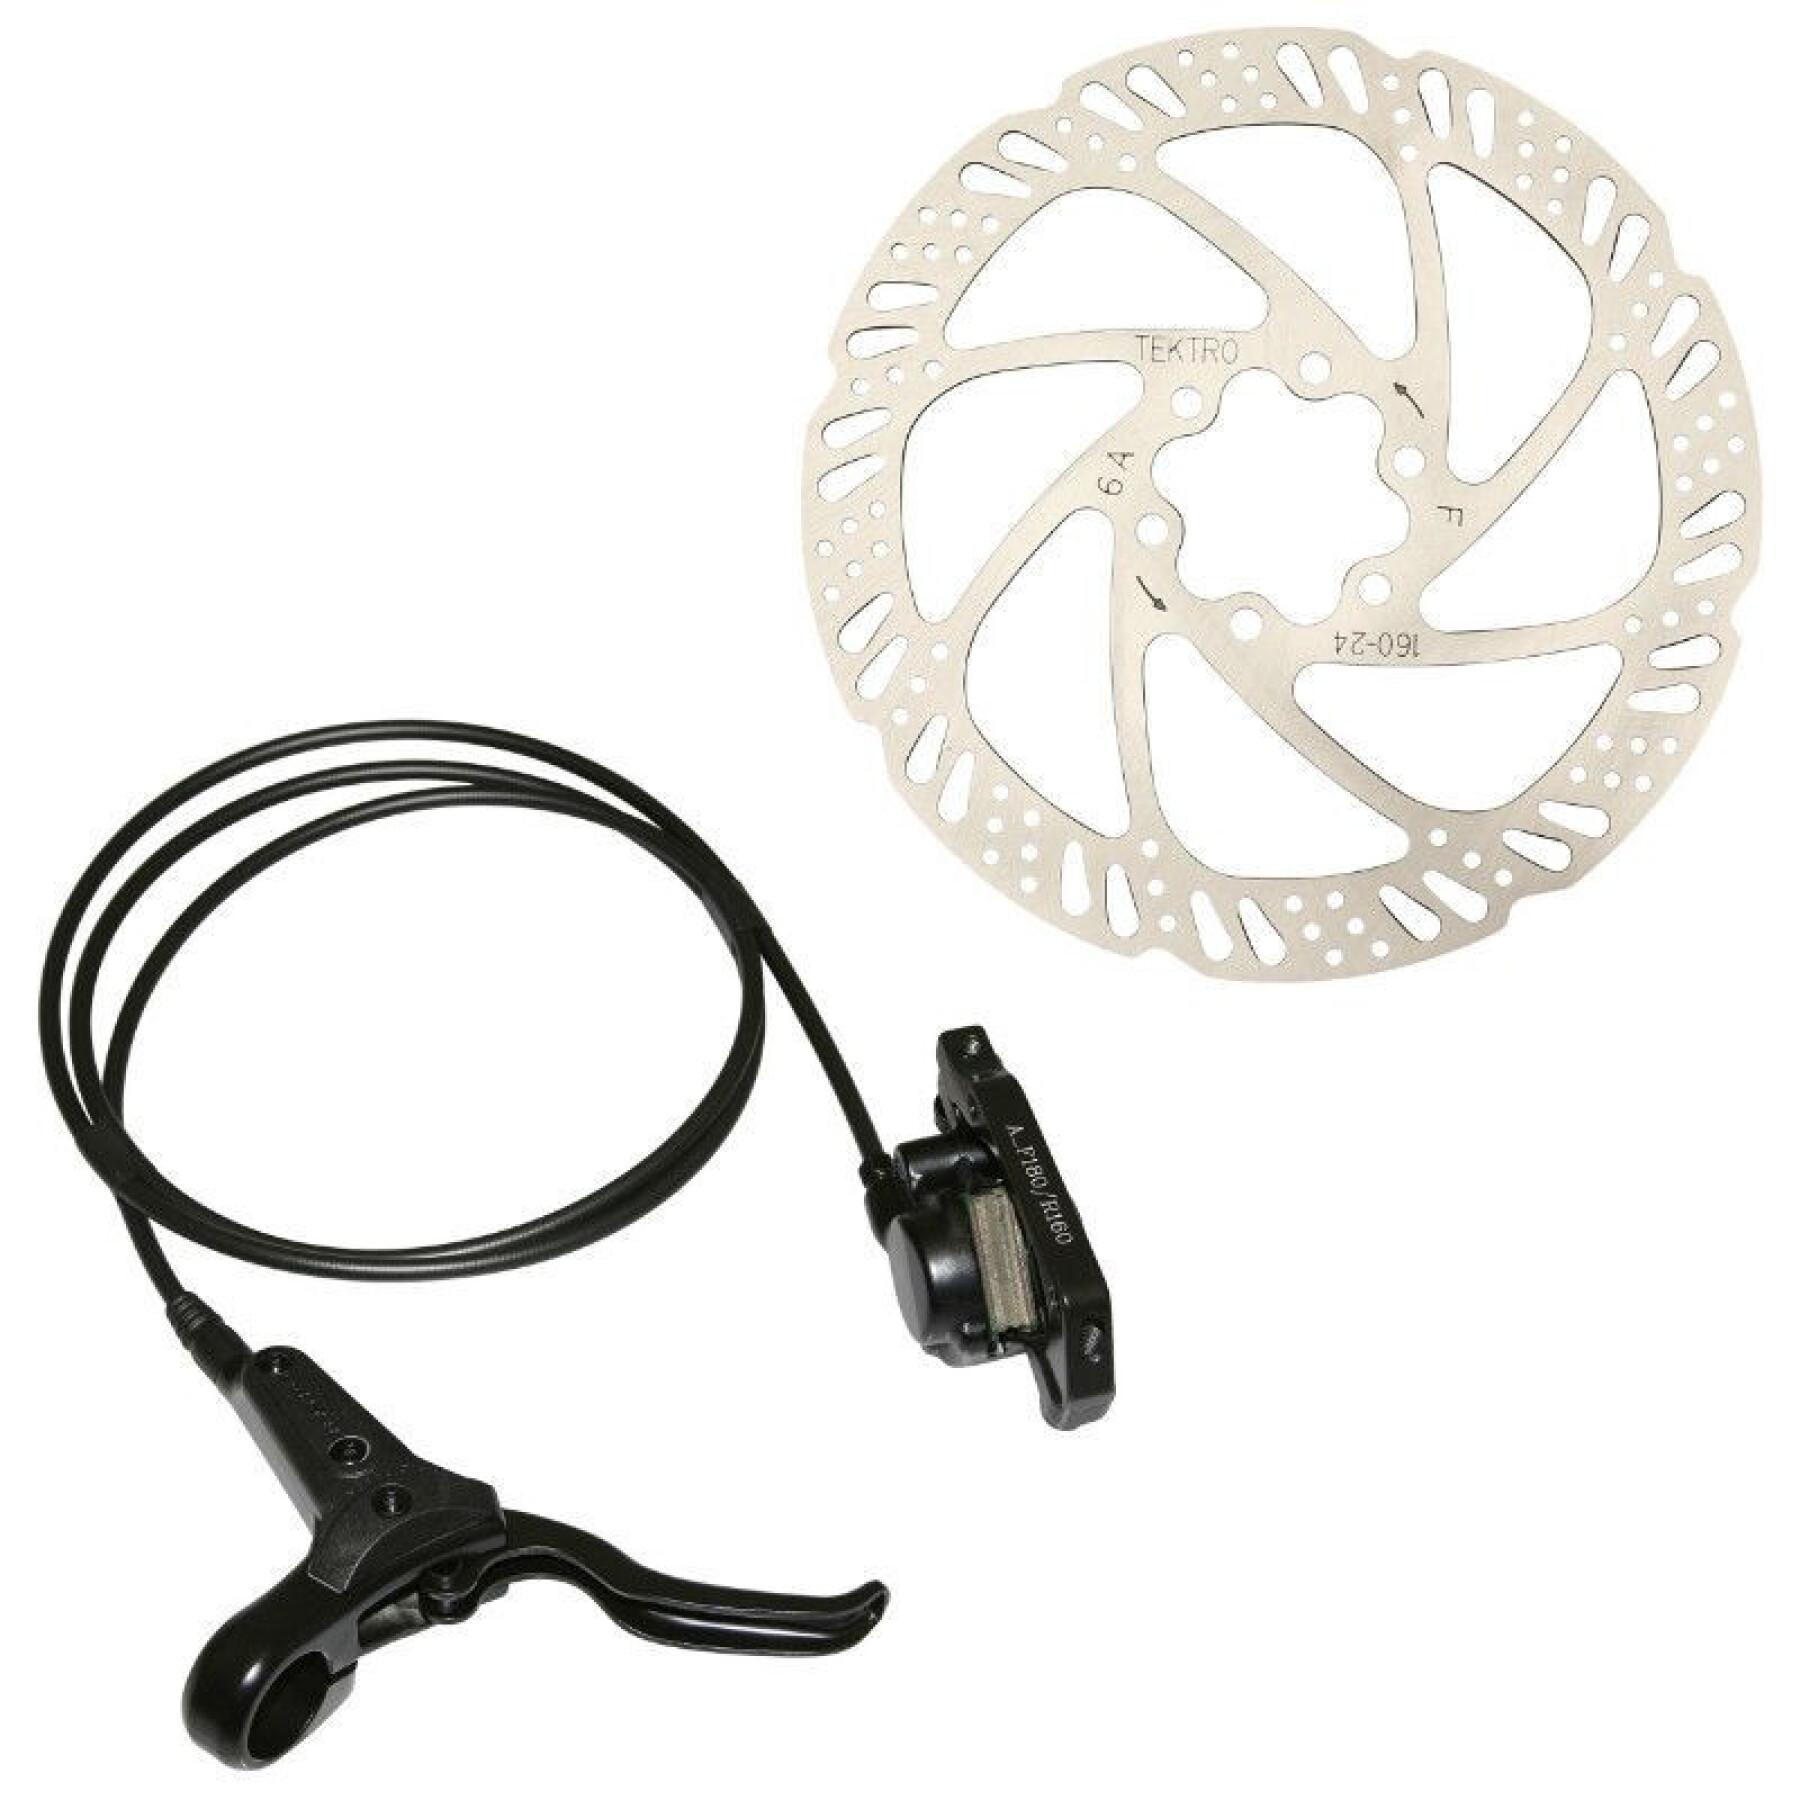 Hydraulic rear disc brake with disc and adapter kit uses deore pads Tektro Auriga